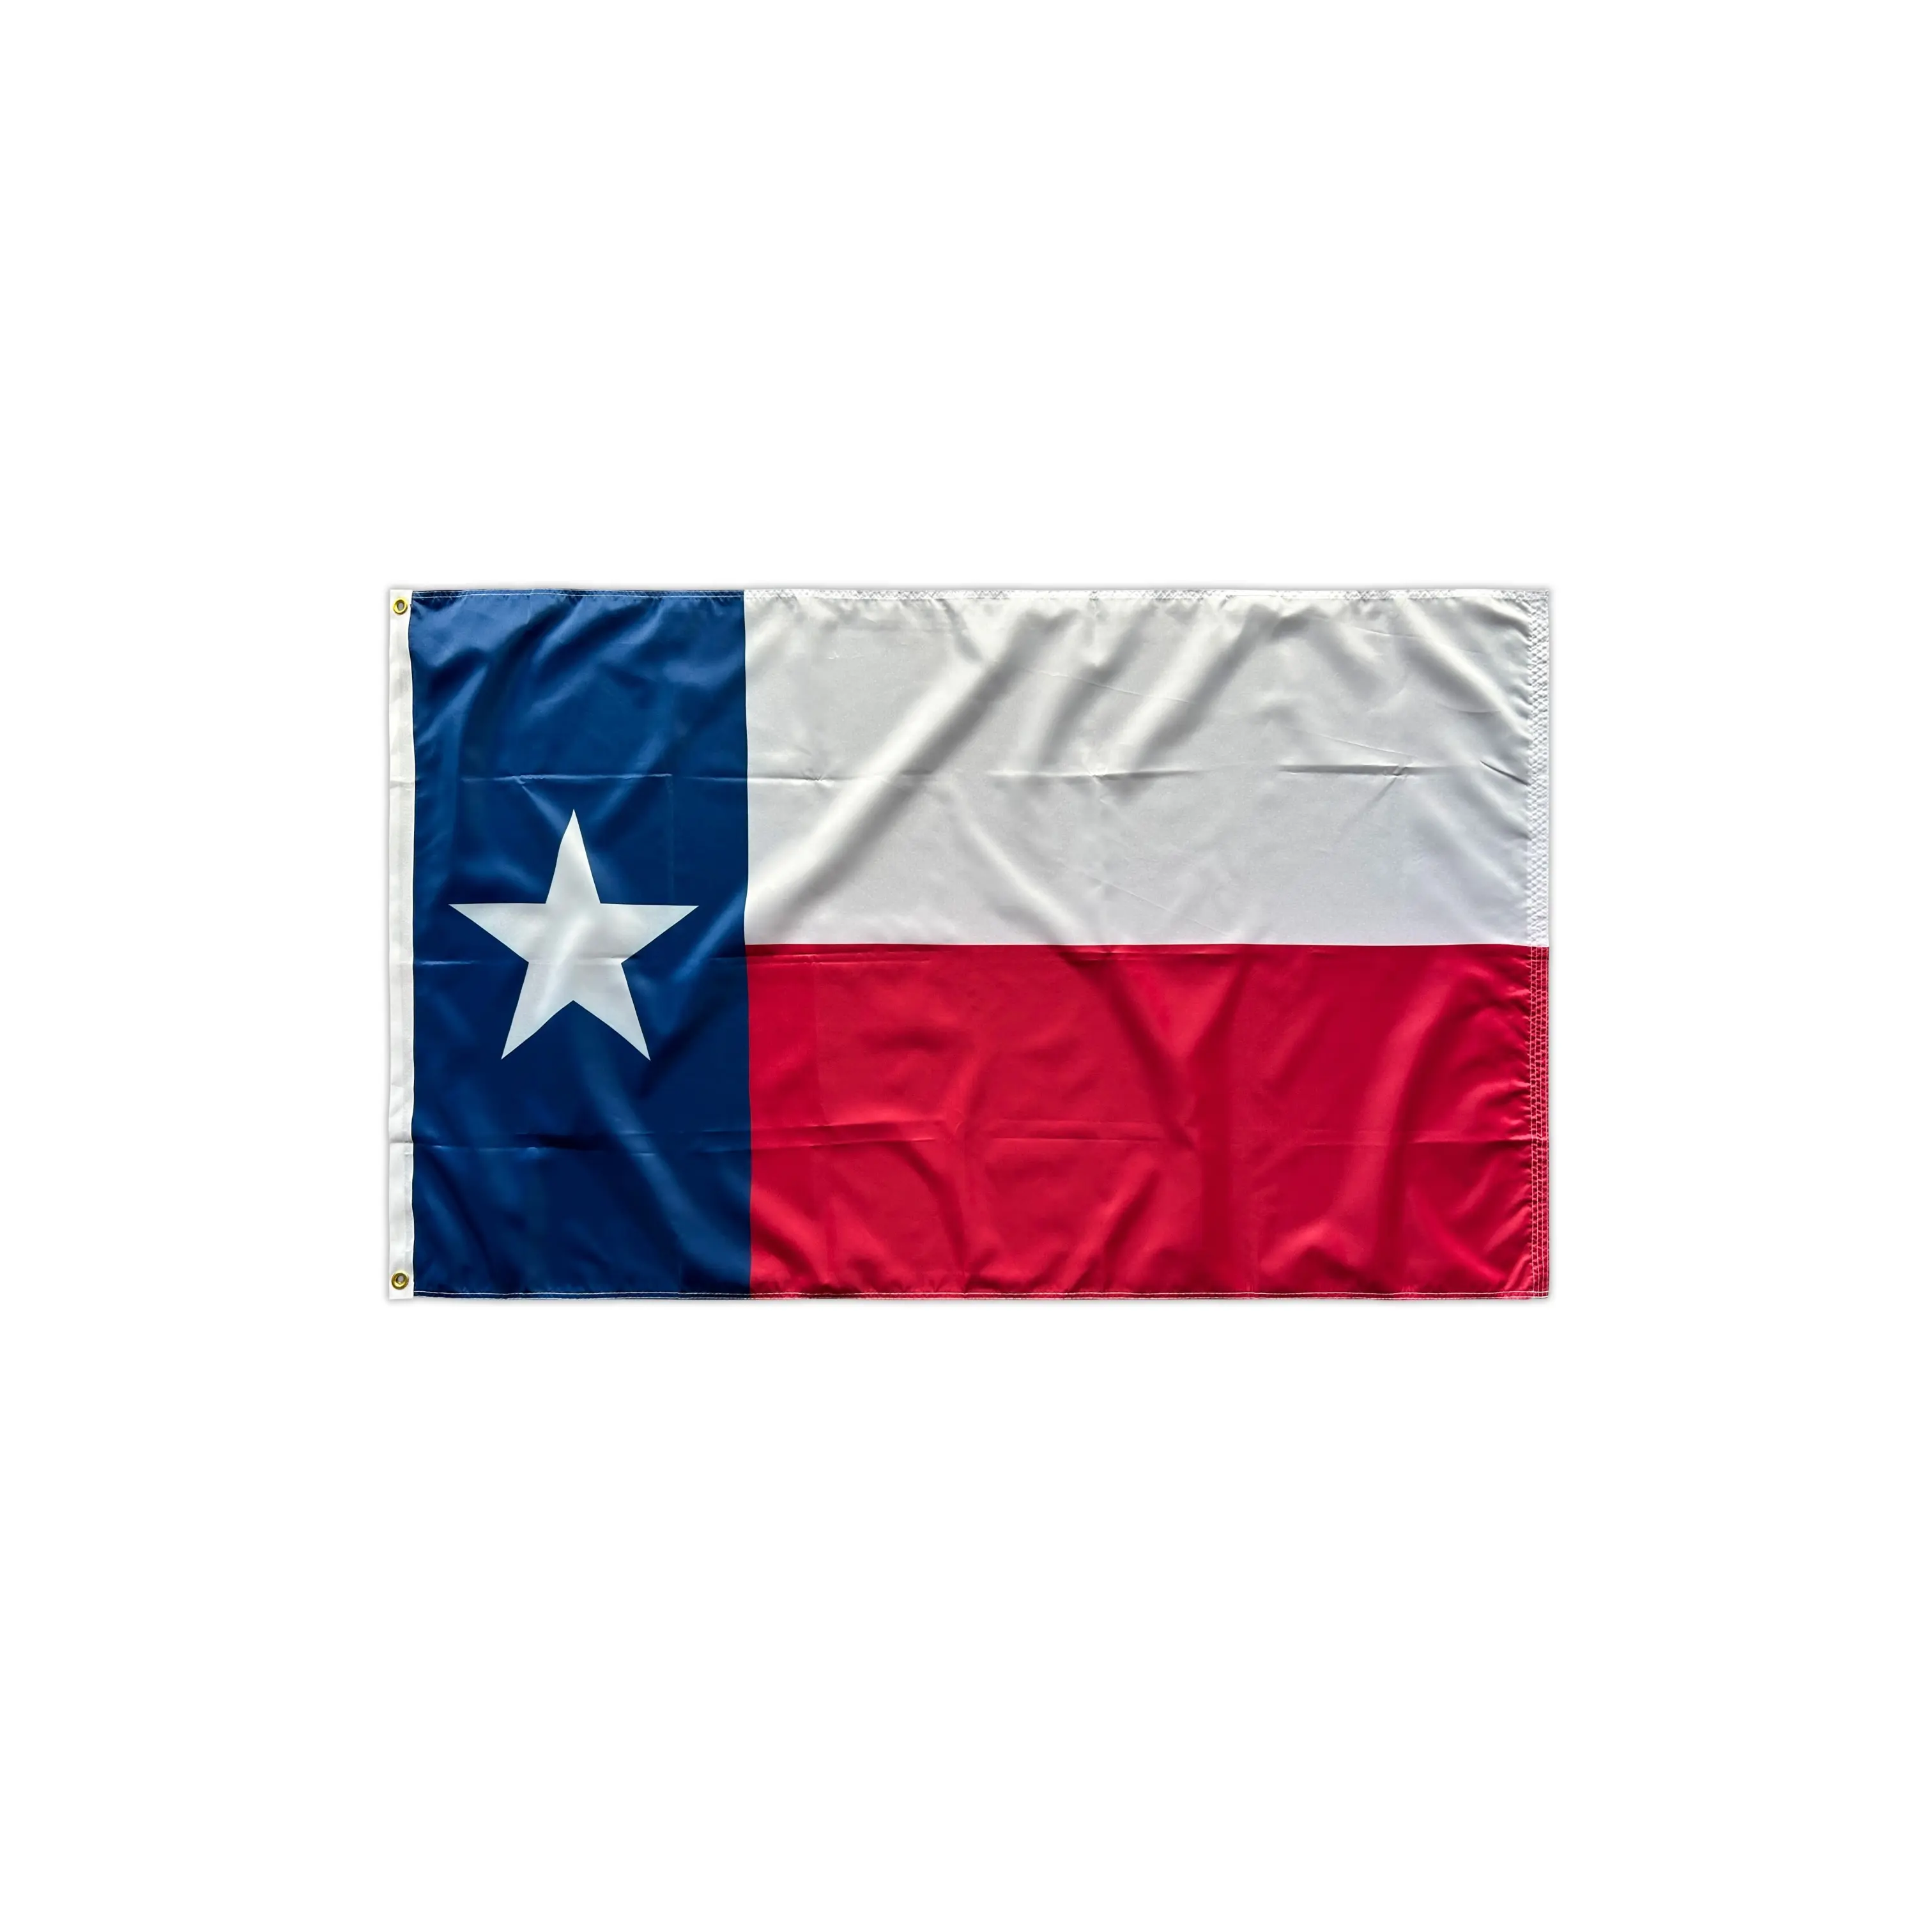 Premium Printed Texas Banner Flag with Brass Grommets Waterproof UV Resistant Printing Flag of Texas State